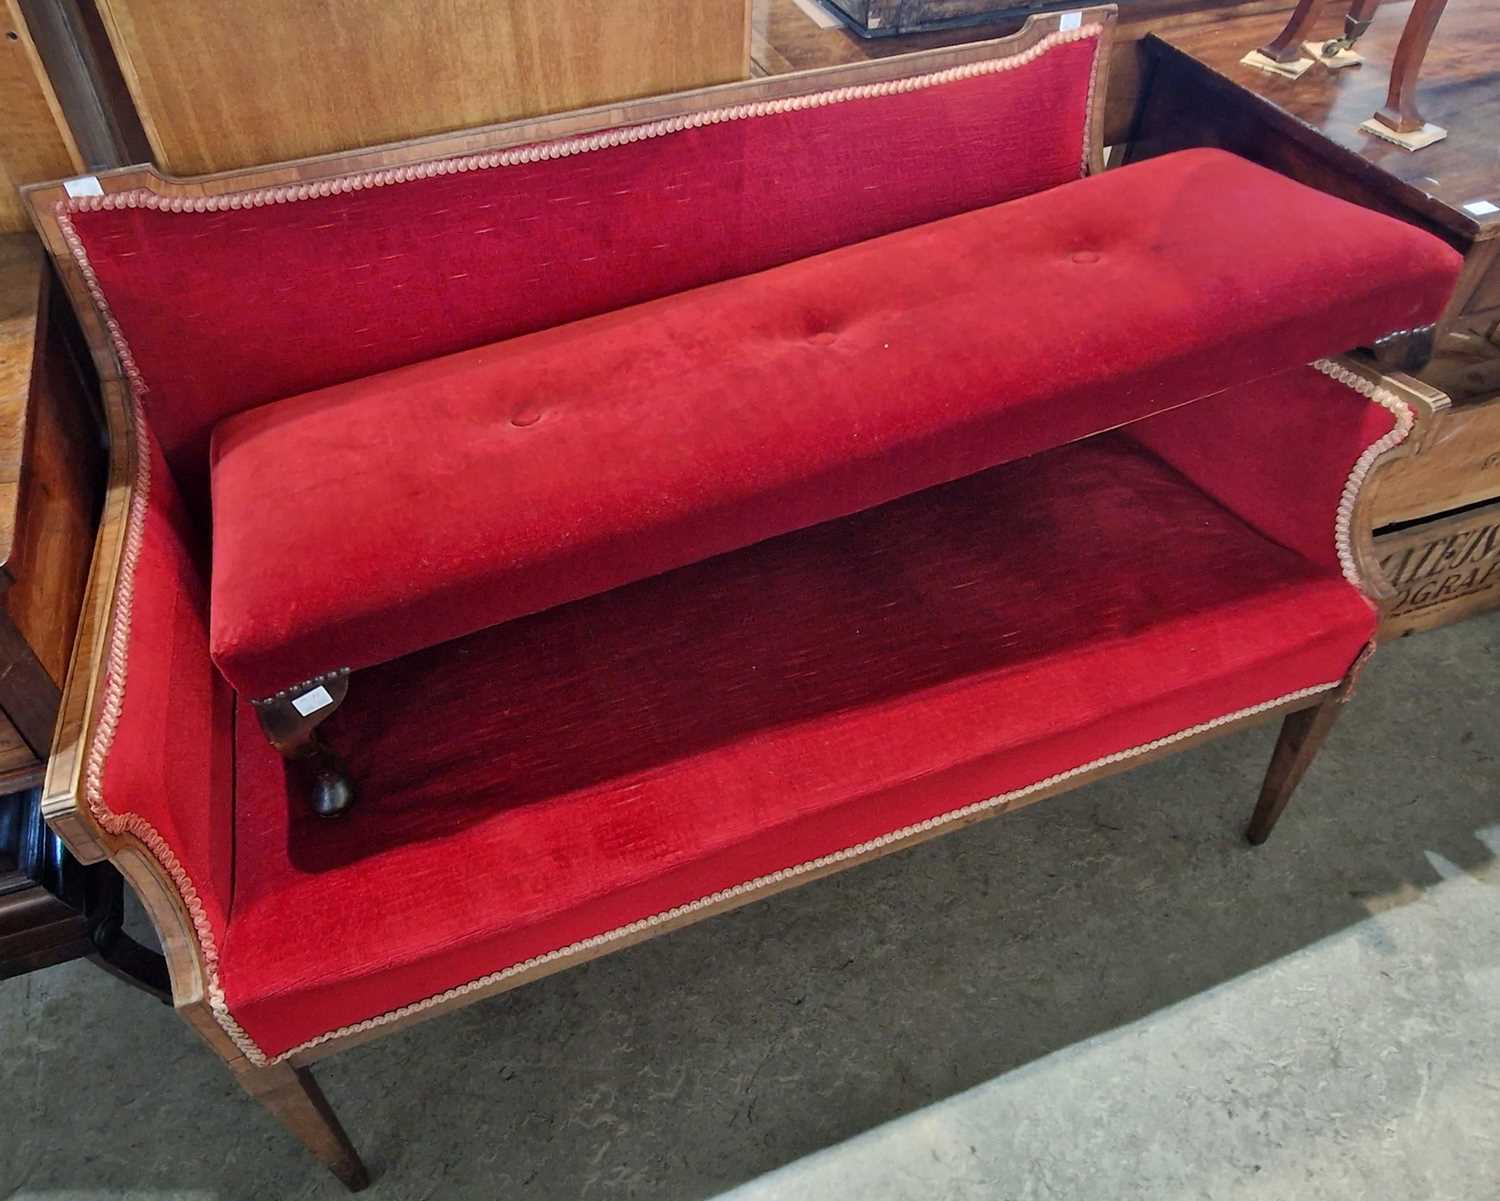 An Edwardian mahogany and satin wood banded red velvet upholstered sofa, 118cm wide together with